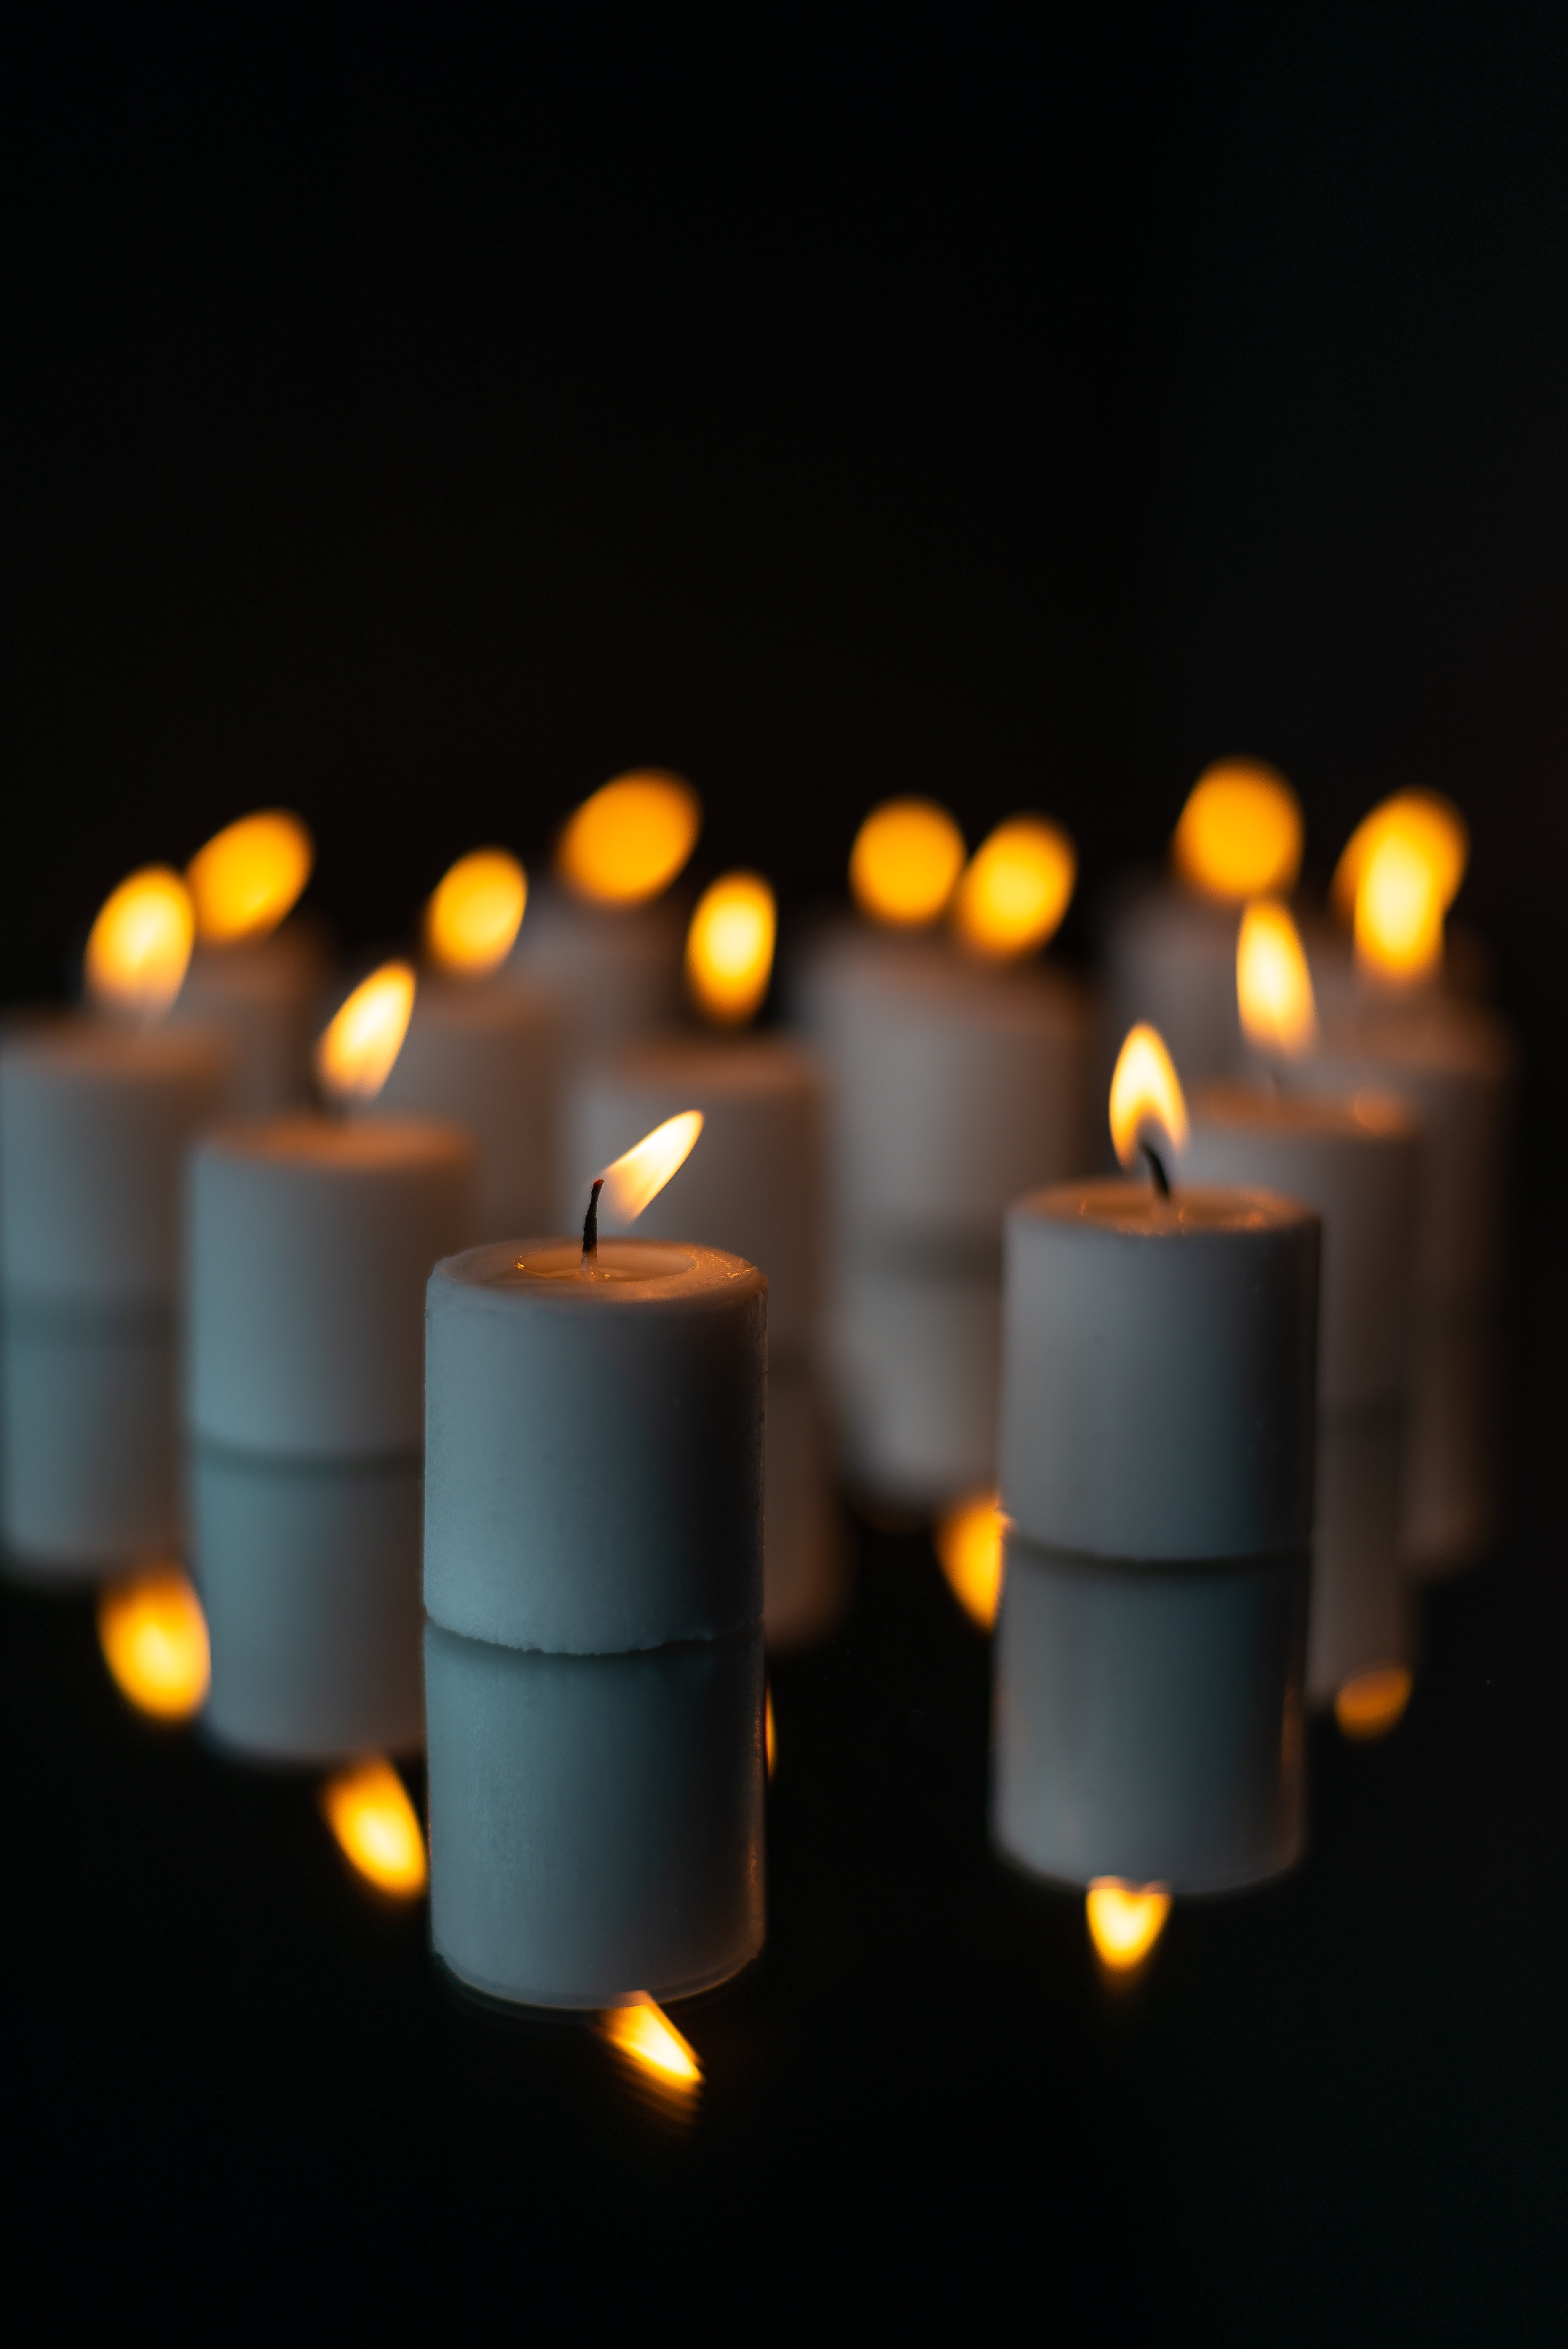 Popular Candles Image for Phone